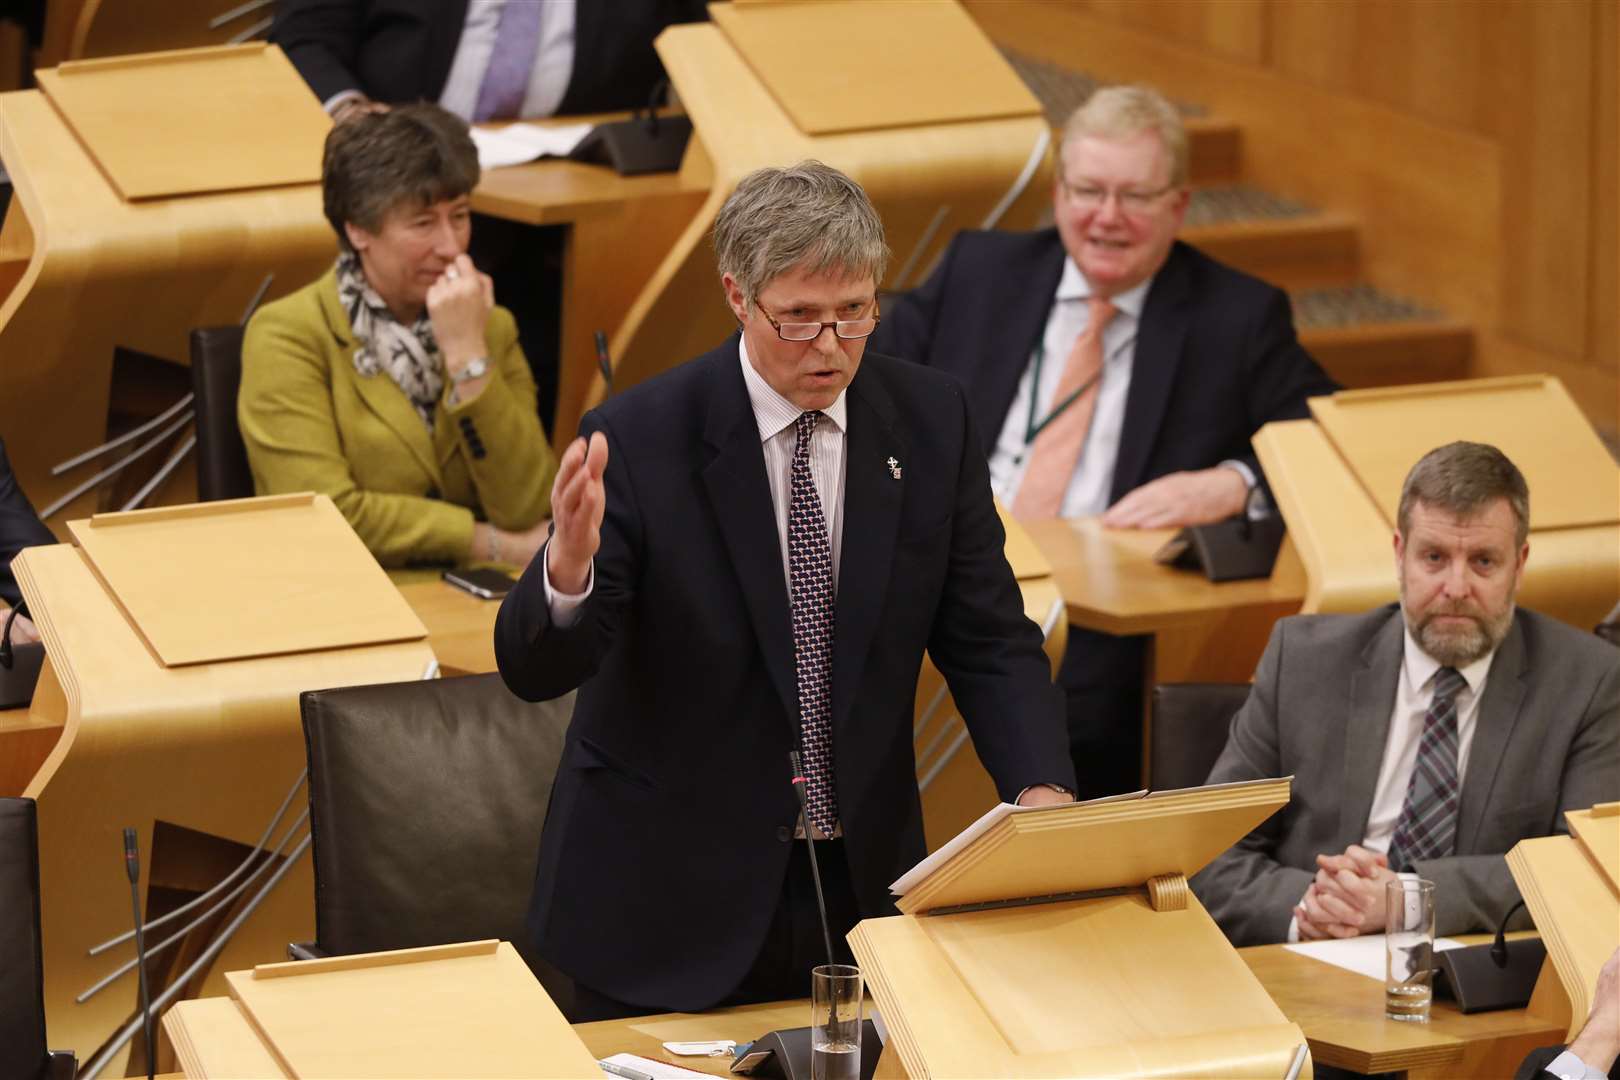 Edward Mountain MSP speaking in the chamber during a debate on Future Rural Policy and Support in Scotland.10 January 2019. Pic - Andrew Cowan/Scottish Parliament.